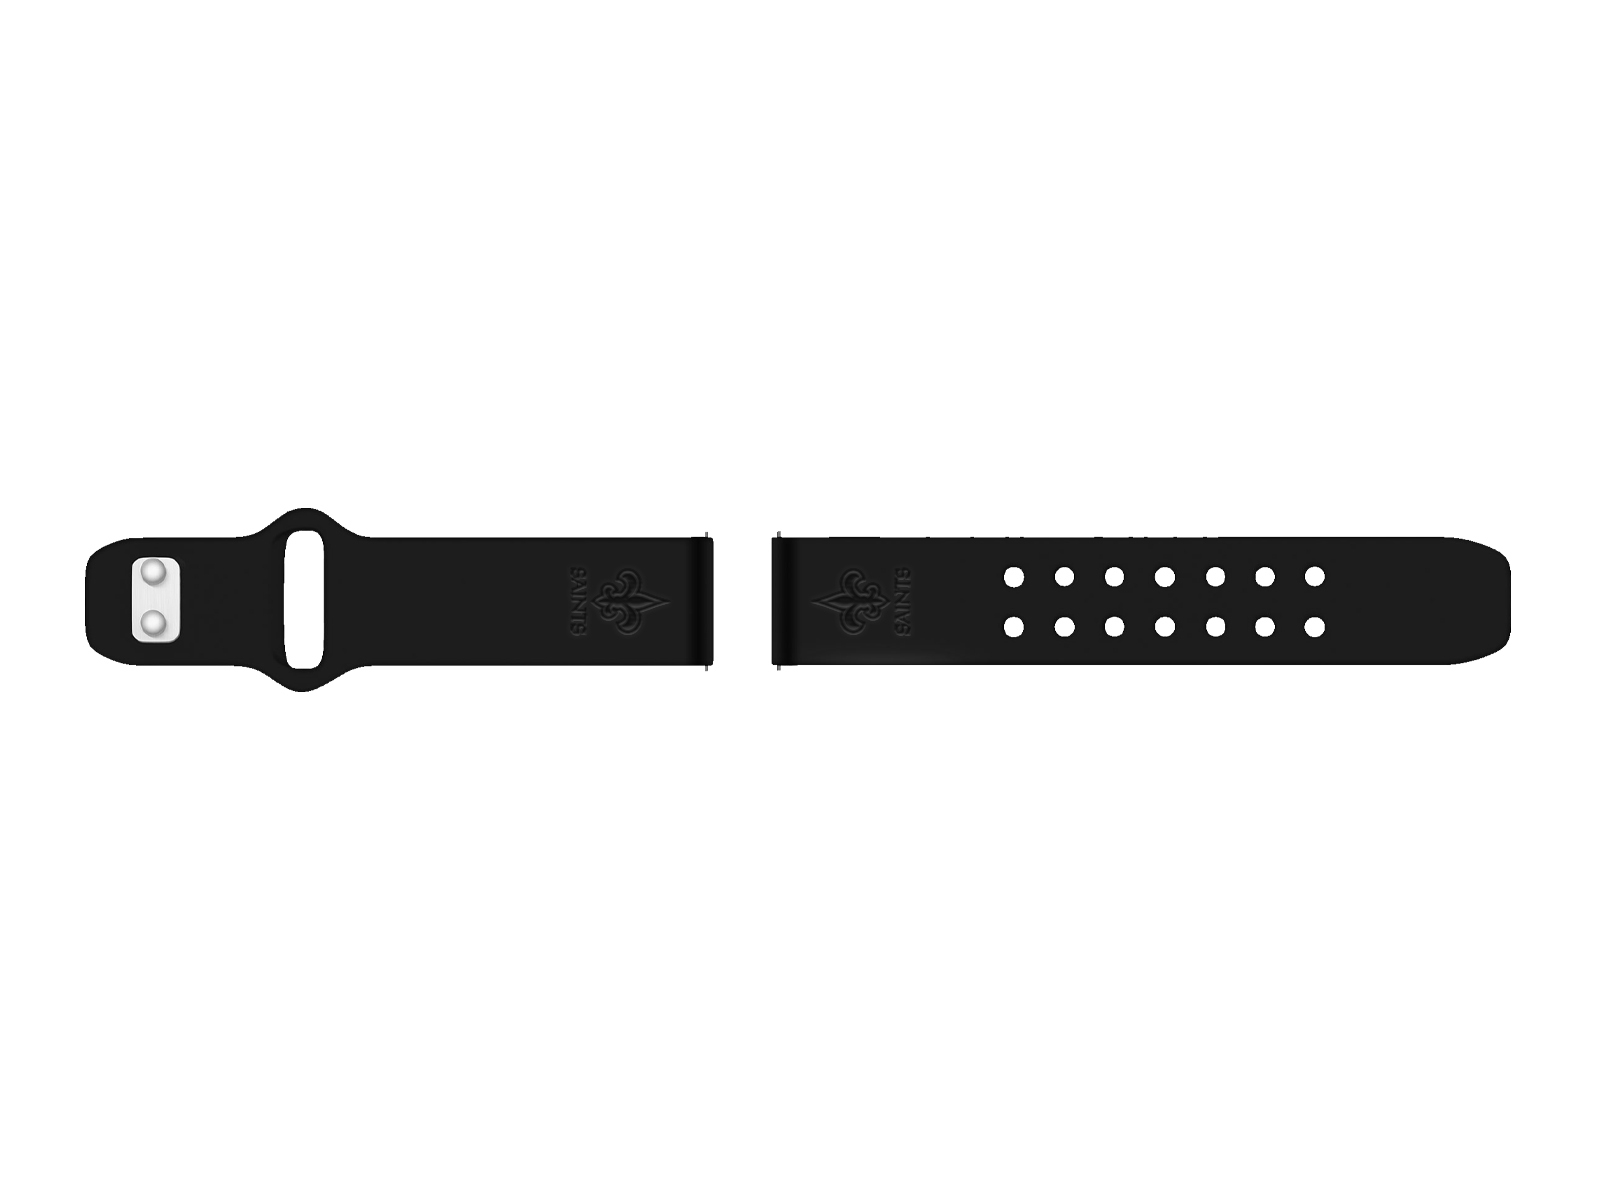 Thumbnail image of New Orleans Saints Debossed Silicone Watch Band (22mm) Black